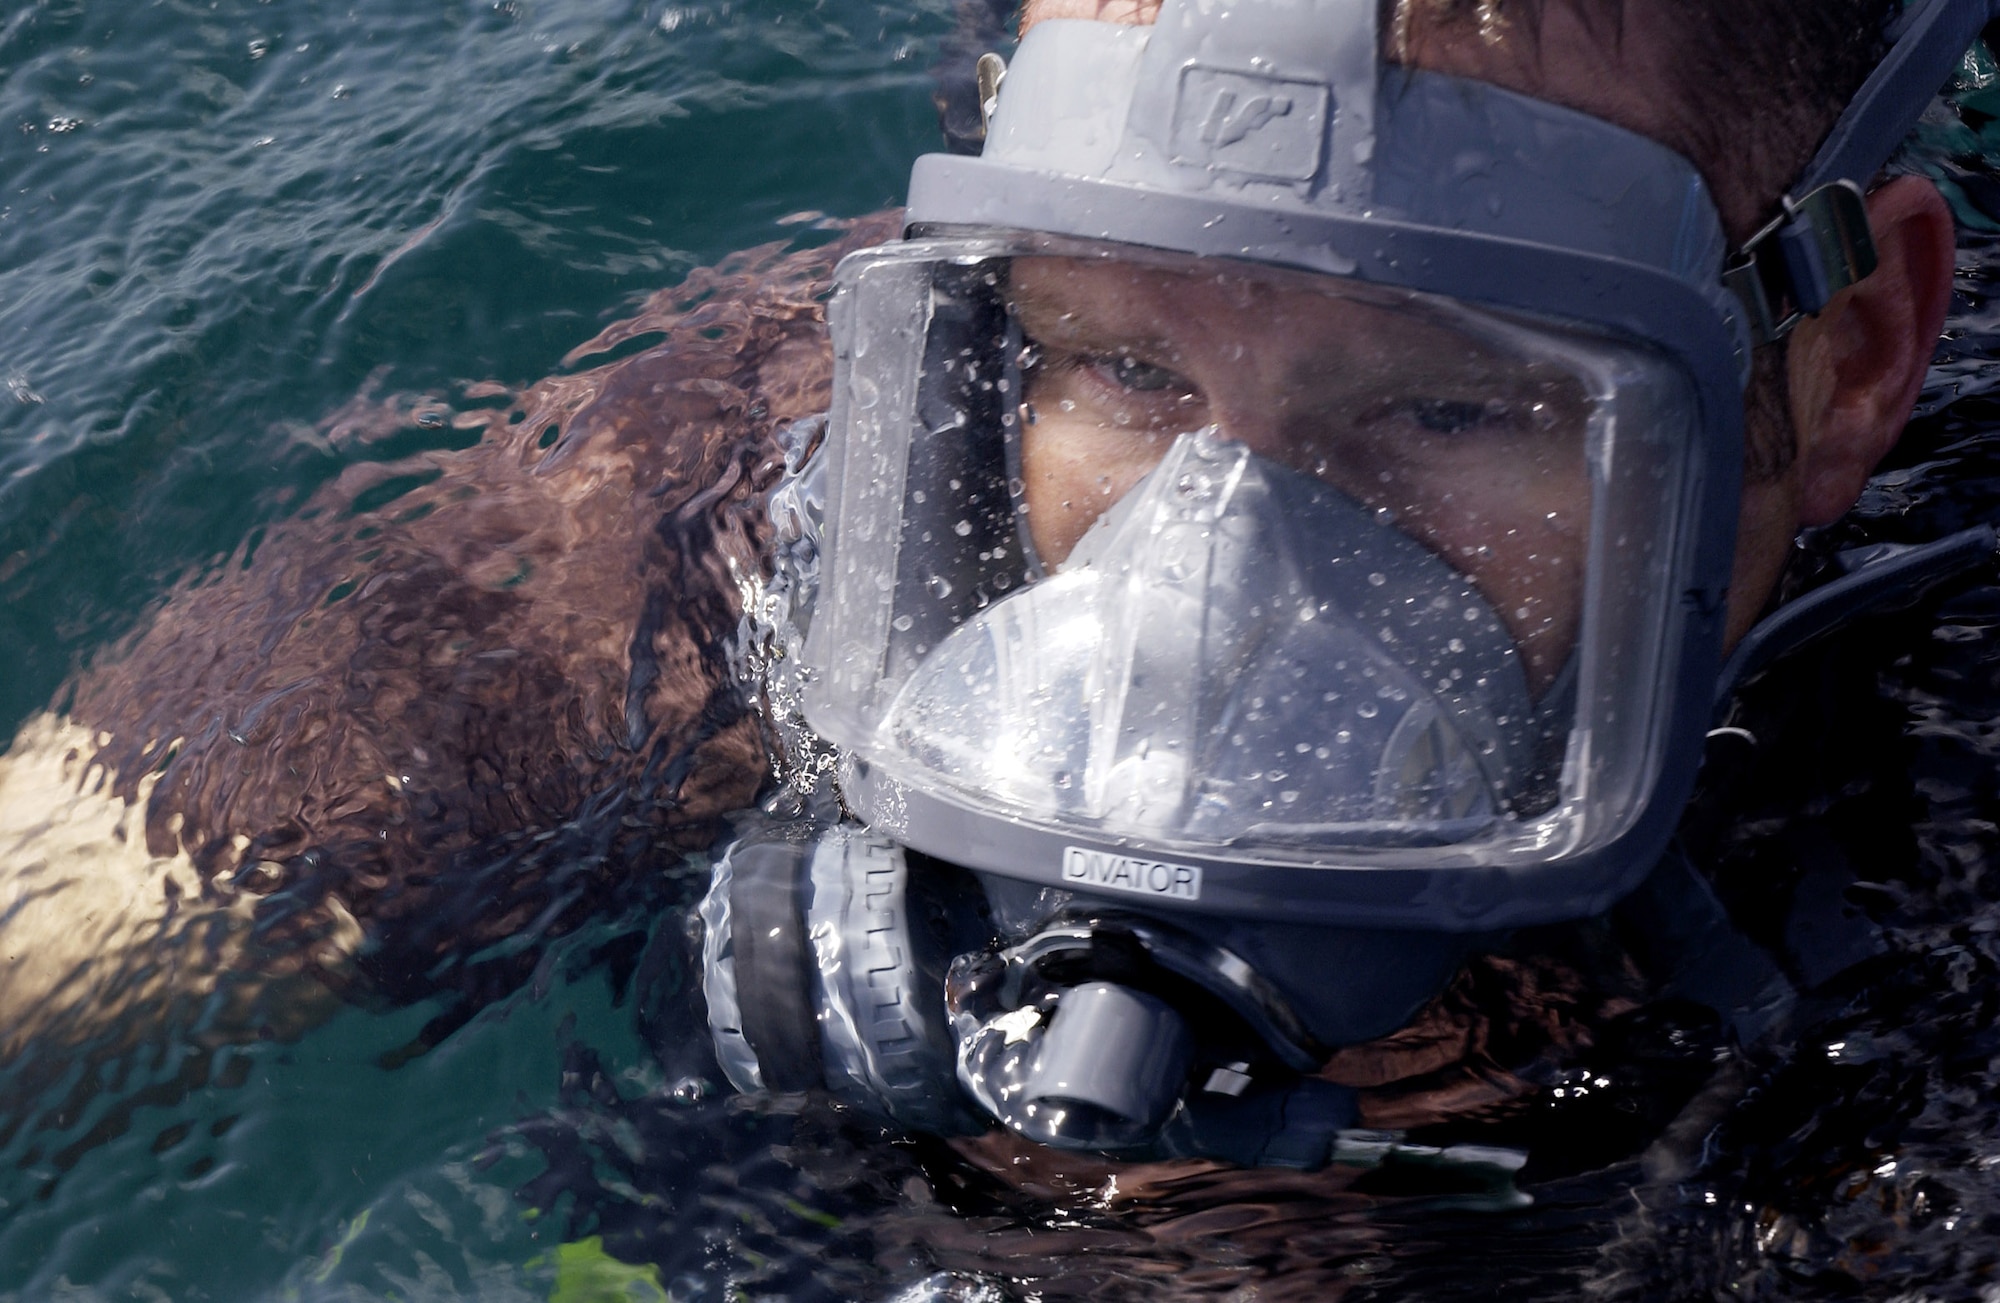 DJIBOUTI, Africa (AFPN) -- An Air Force pararescueman surfaces after dive currency training off the coast here. The Airman is a Reservist from the 304th Rescue Squadron at Portland International Airport, Ore. (U.S. Air Force photo by Staff Sgt. Ricky A. Bloom) 
